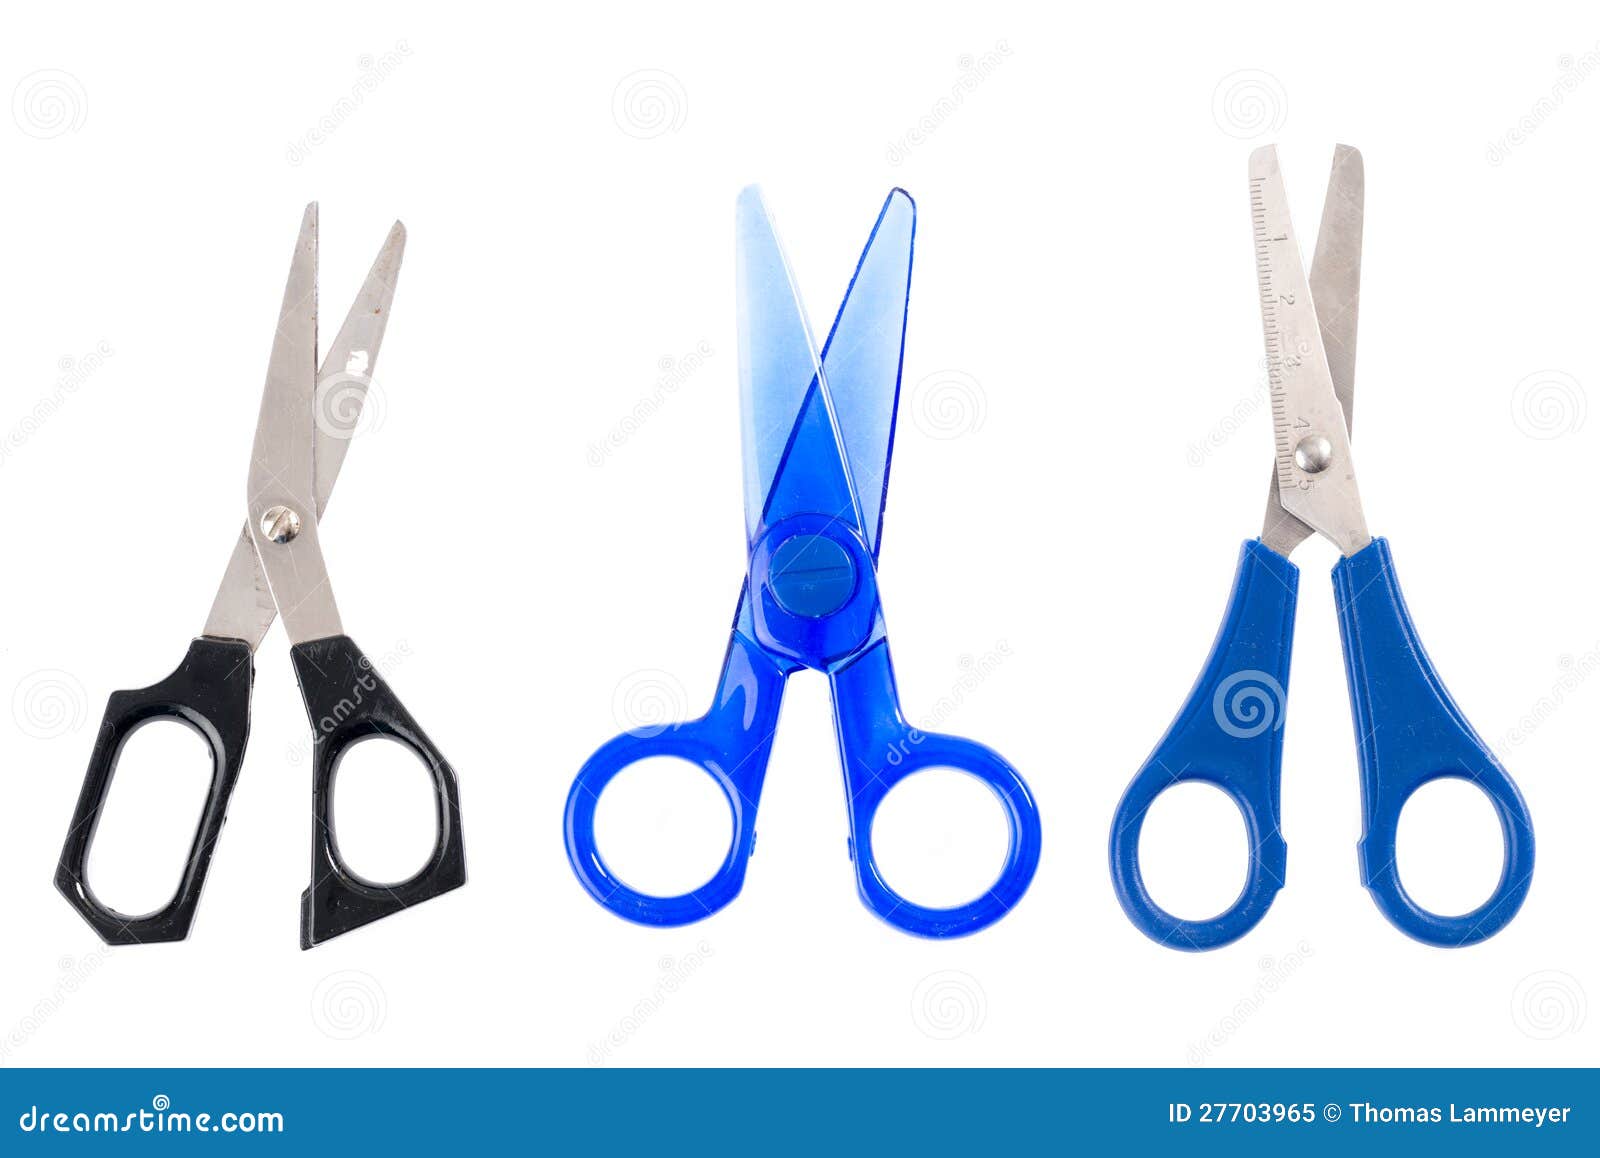 370+ Safety Scissors Stock Photos, Pictures & Royalty-Free Images